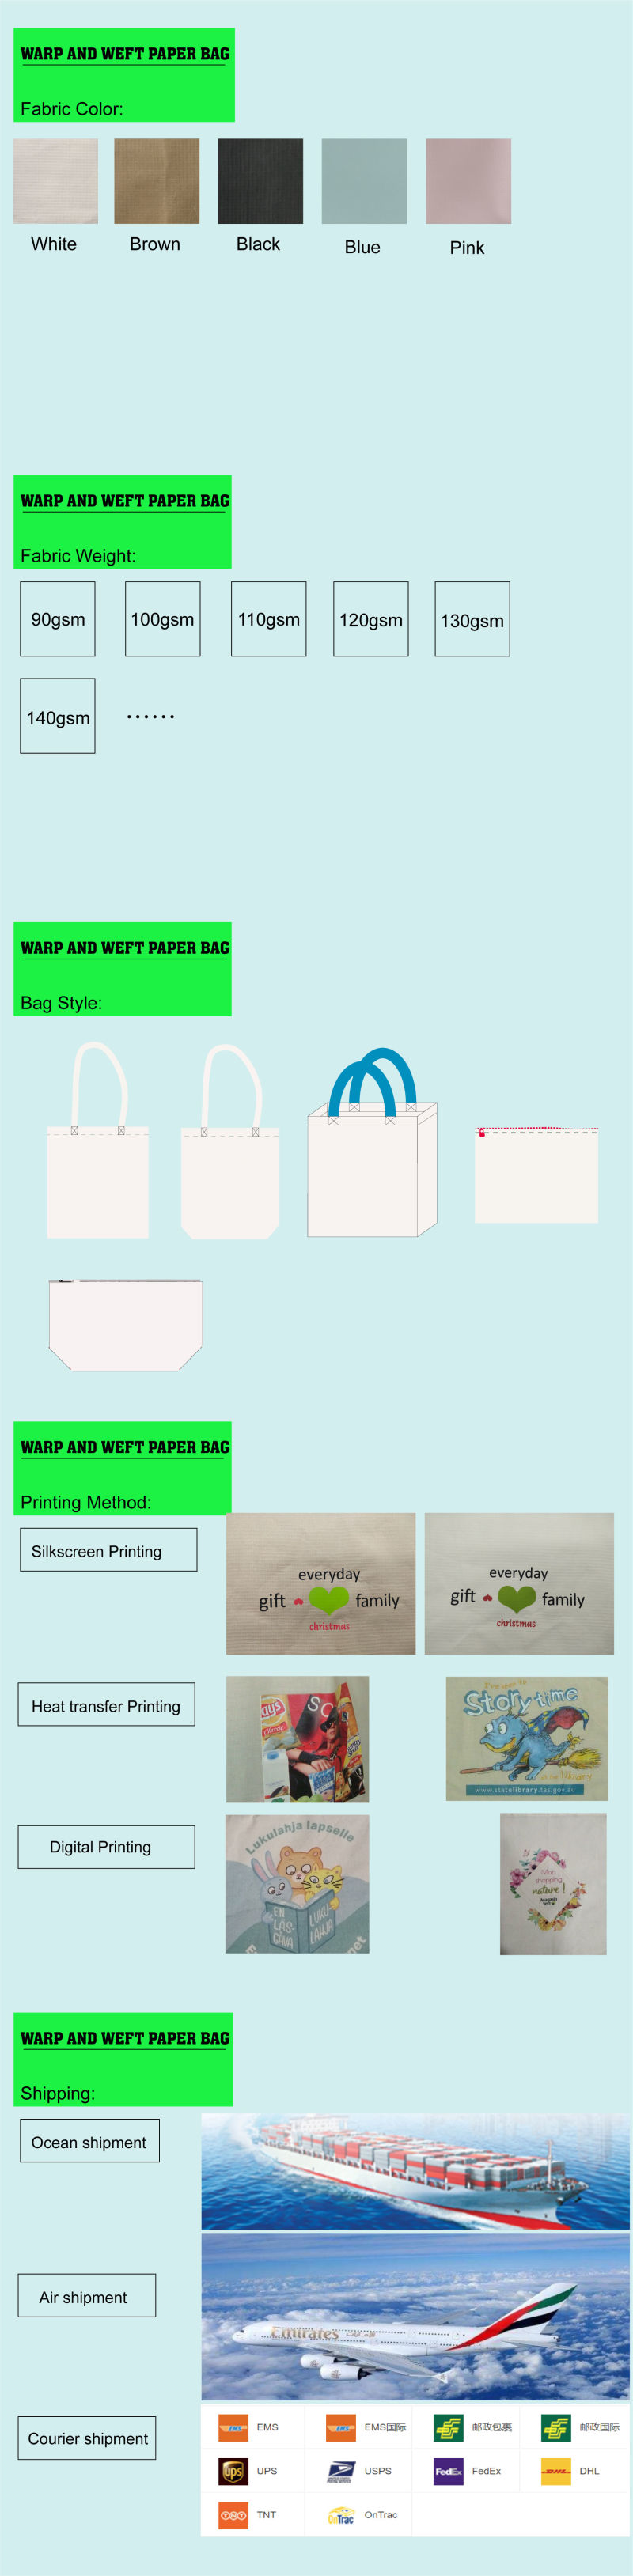 Handle Length Biodegradable Recycled Paper Shopping Bag, Paper Carrier Bag, Paper Grocery Bag, Gift Paper Bag